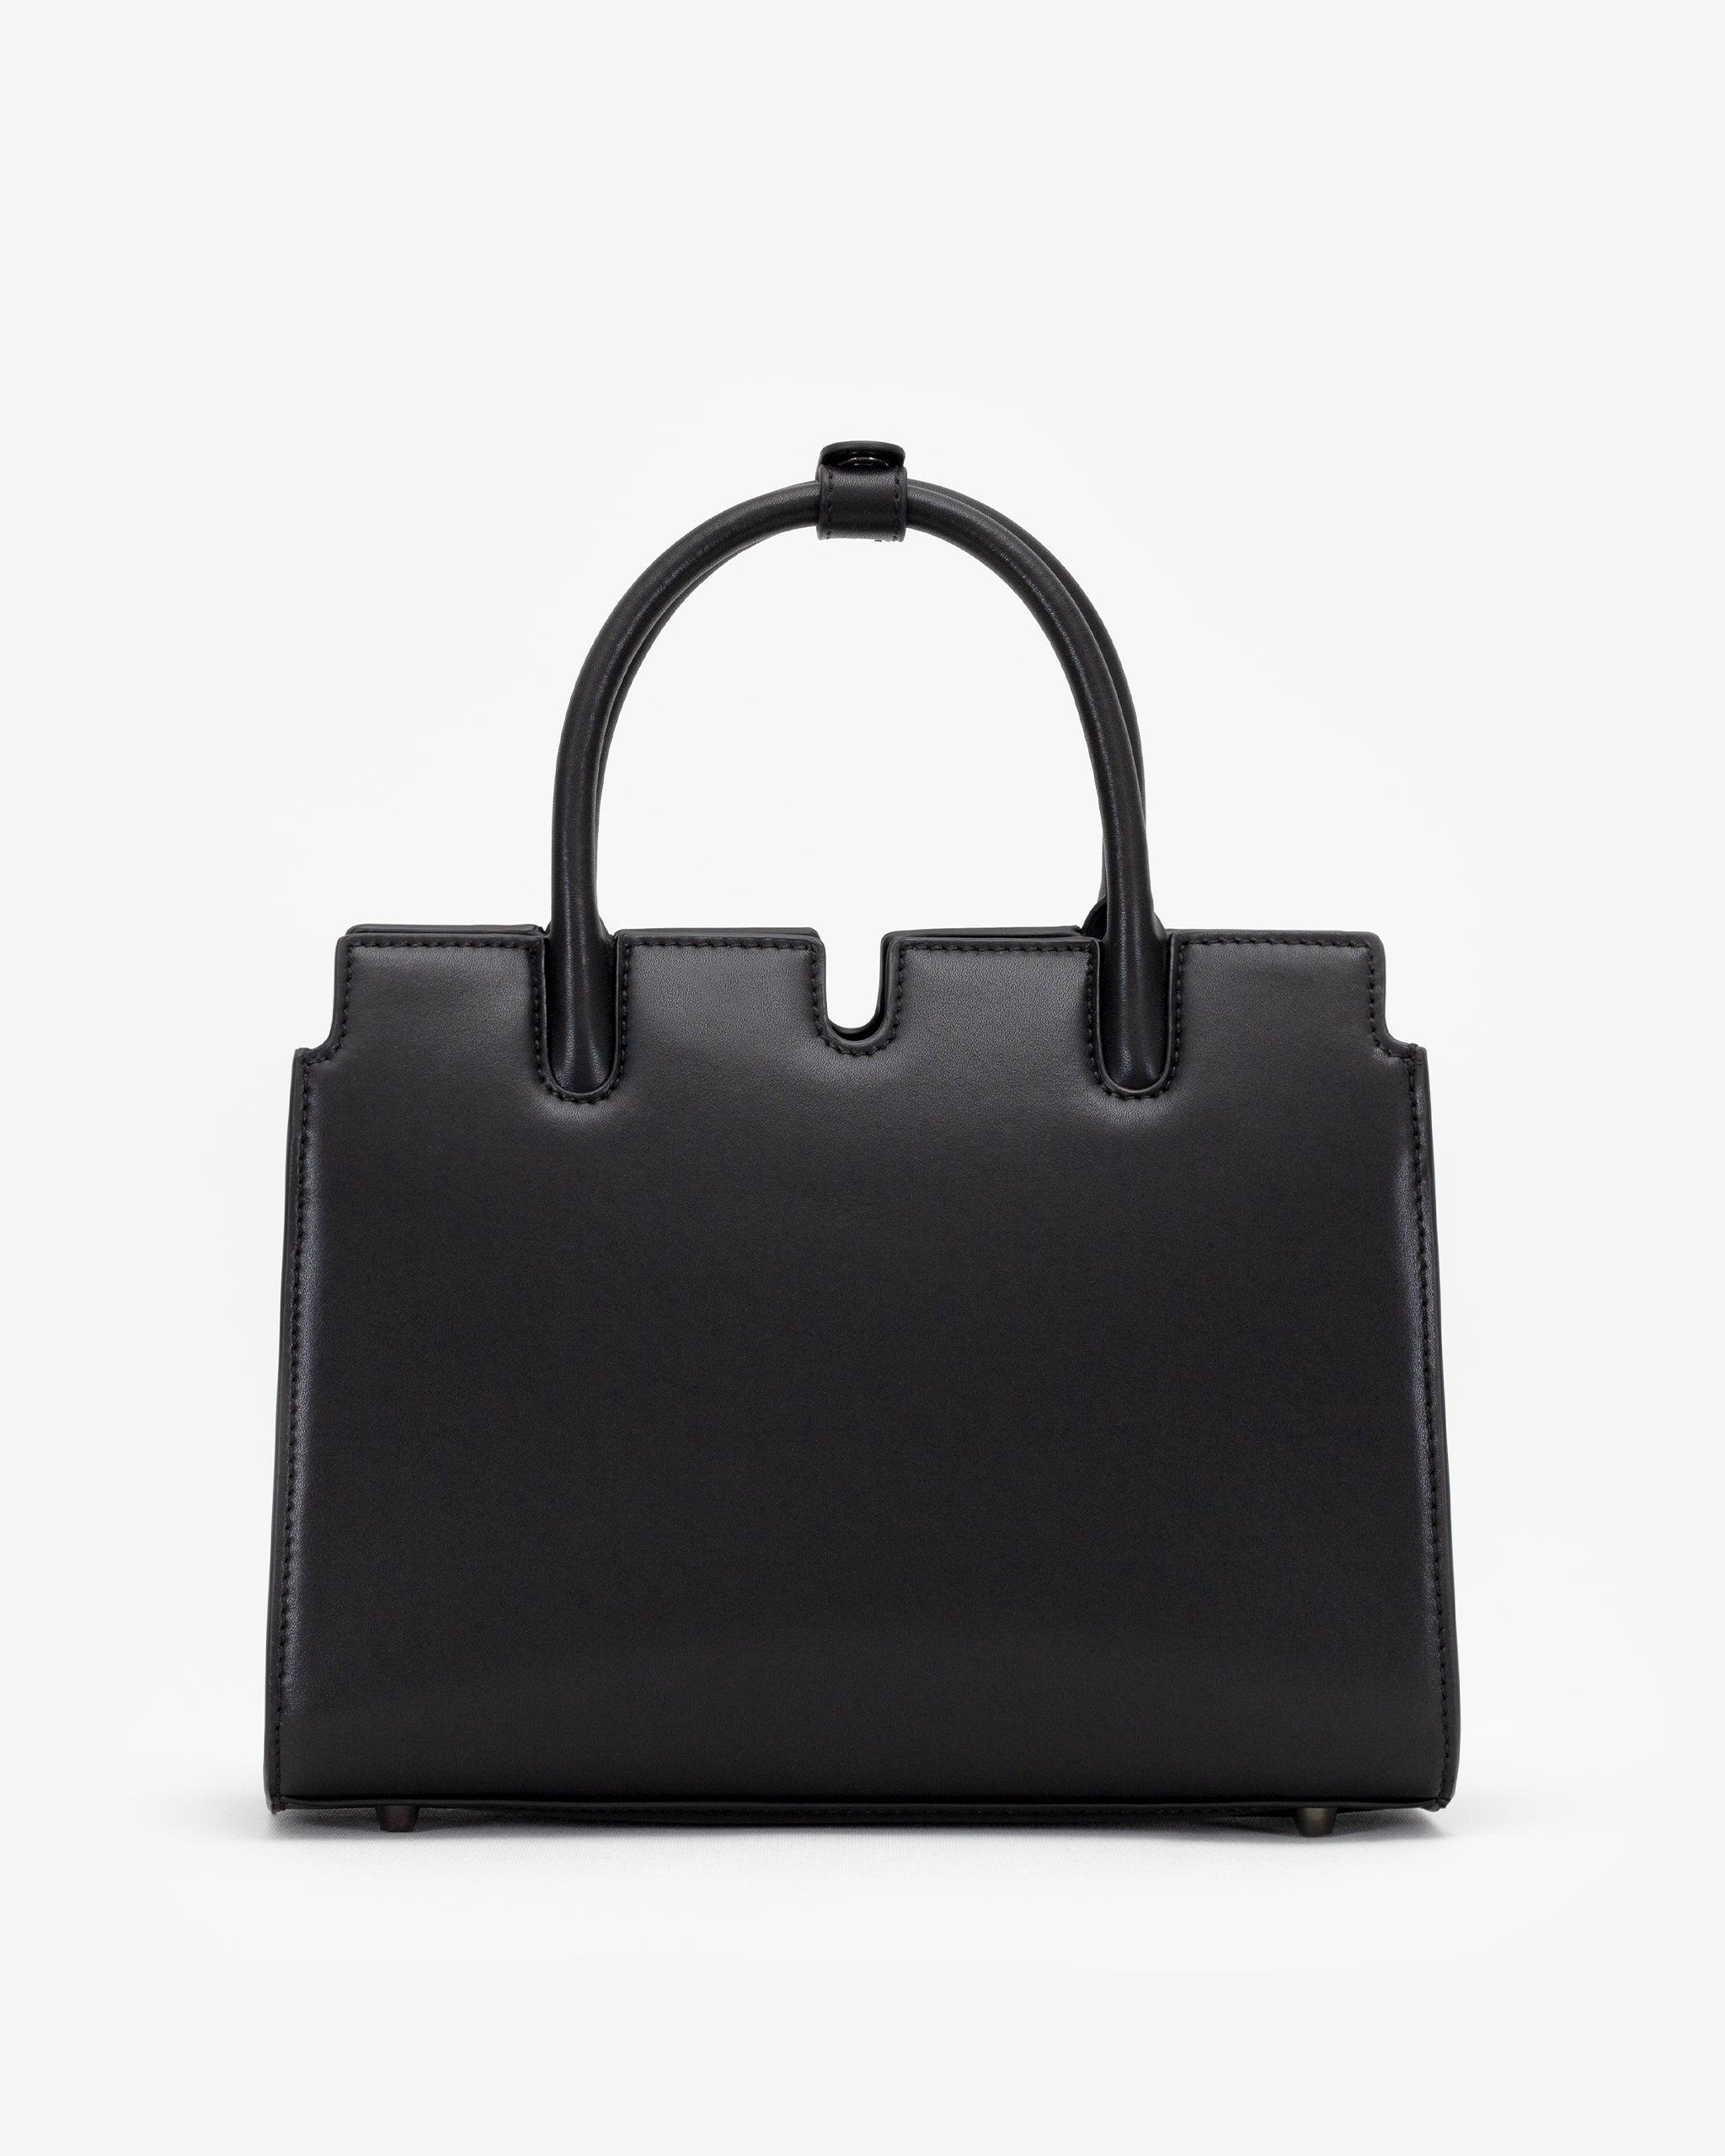 All Day Top Handle Bag in Black/Gunmetal with Personalised Hardware